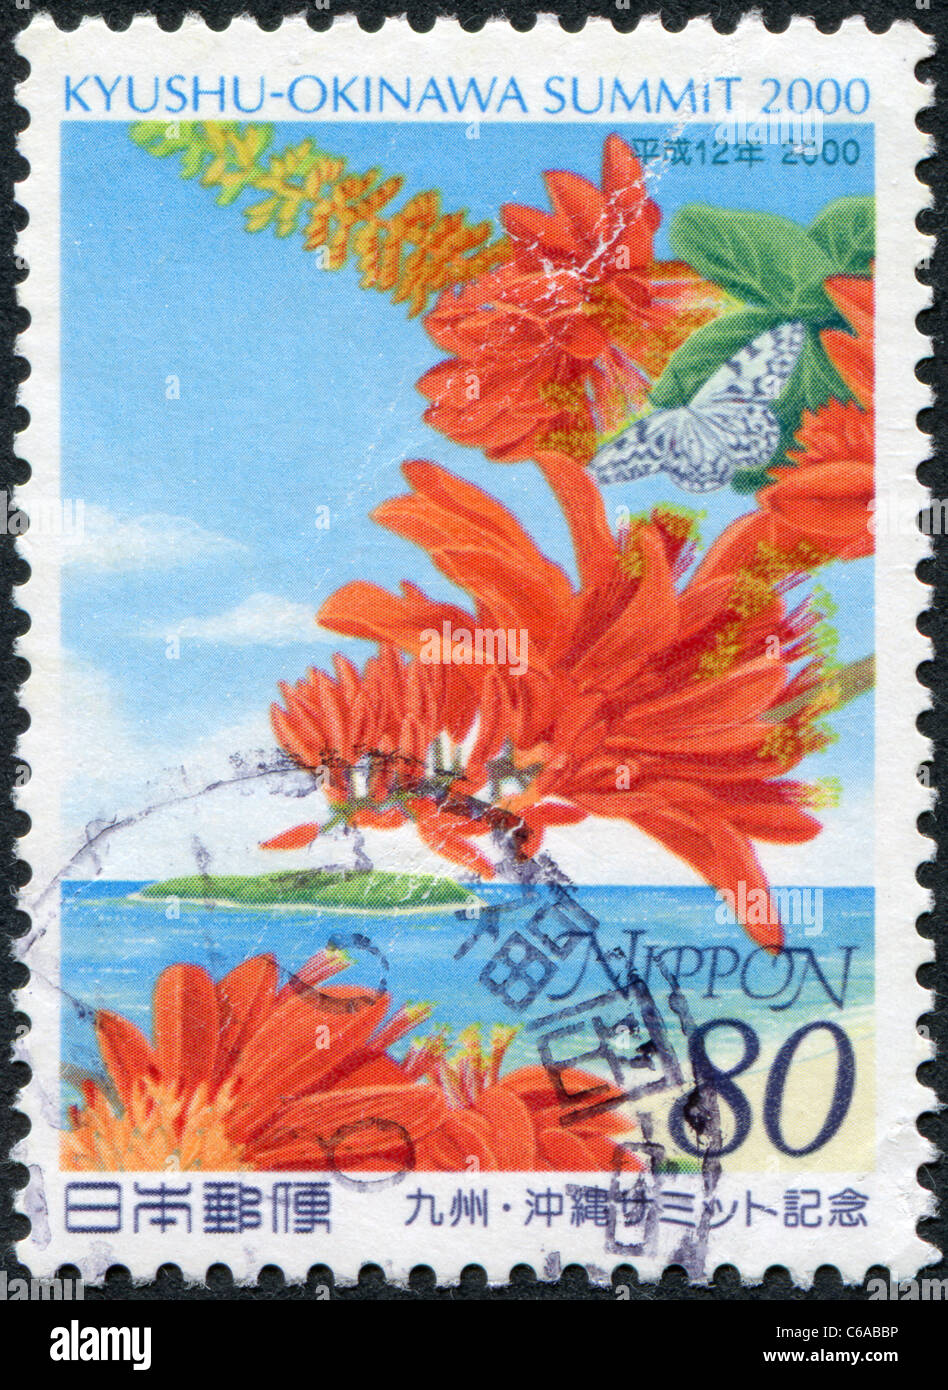 JAPAN-2000: A stamp printed in Japan, dedicated to the Kyushu-Okinawa Summit, shows Ogomadara Butterfly and Erythrina variegata Stock Photo